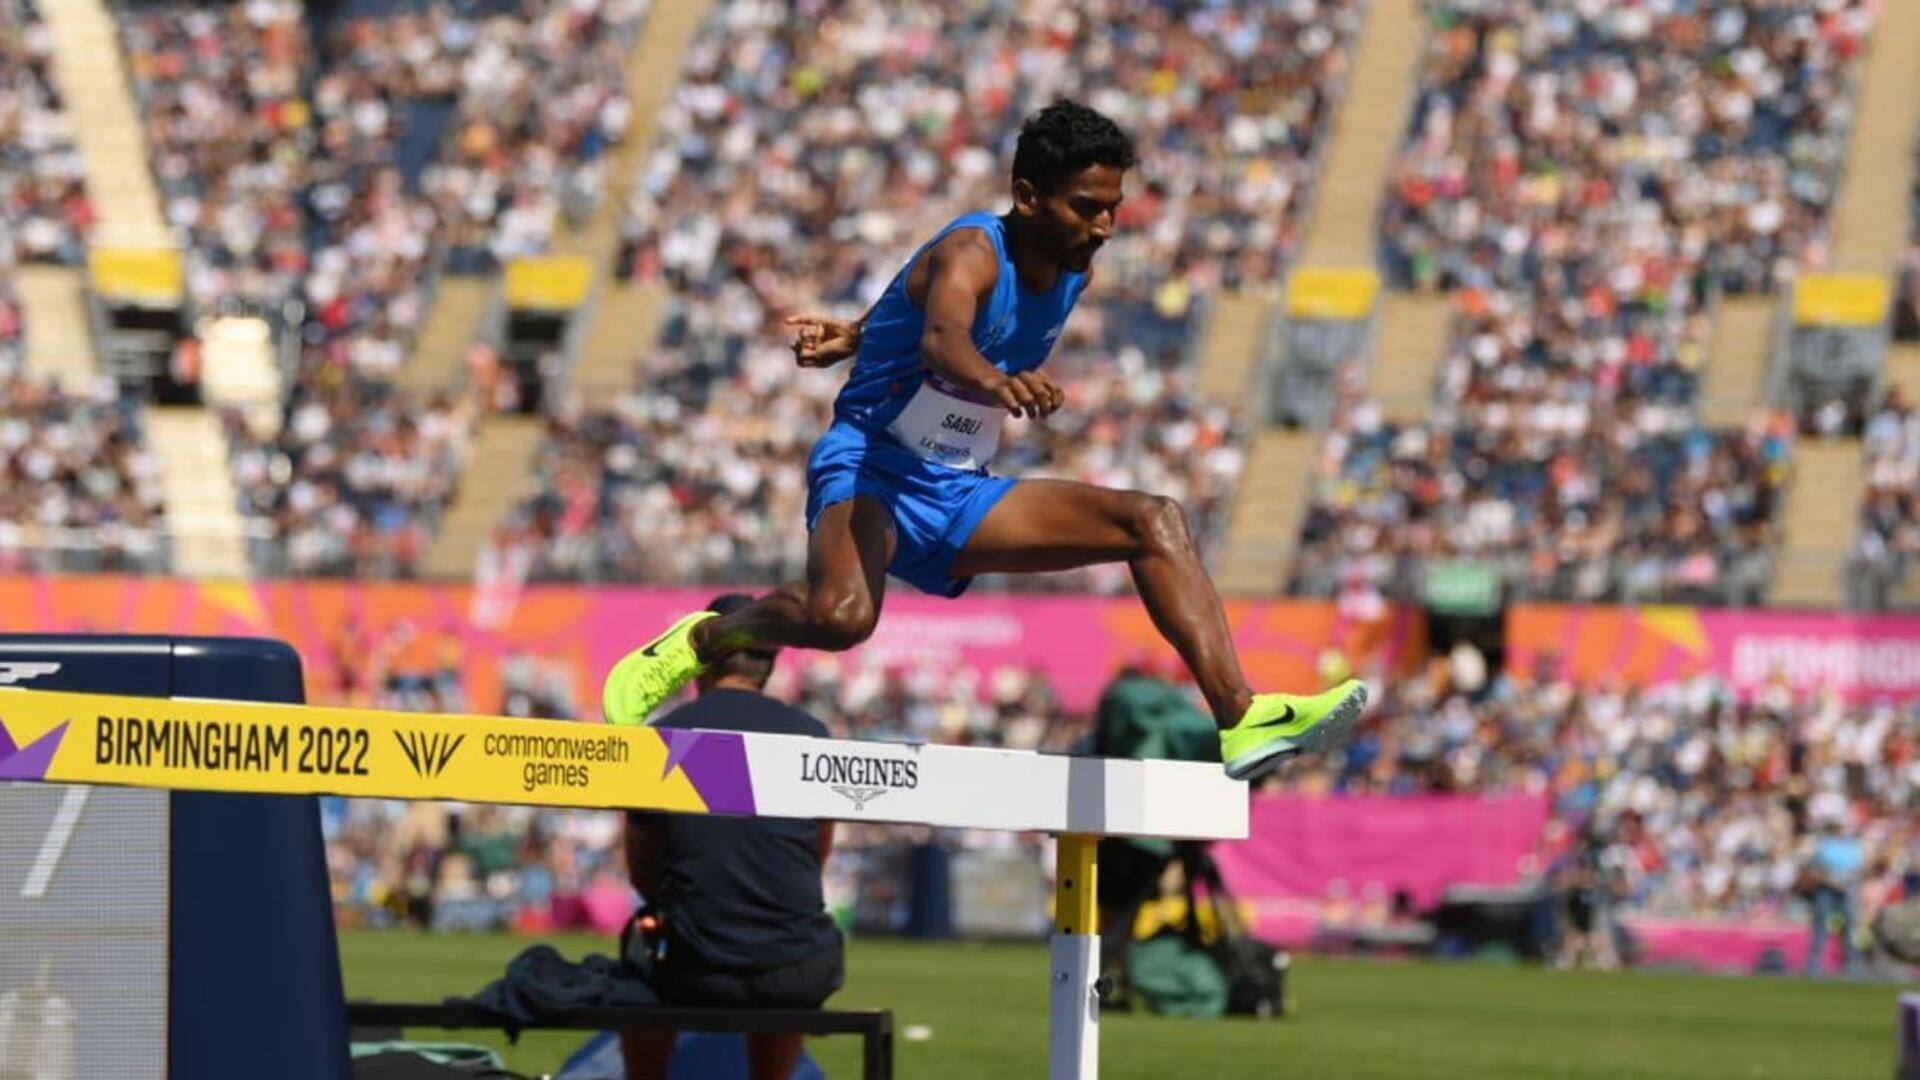 Who is India's star steeplechaser Avinash Sable? Know details